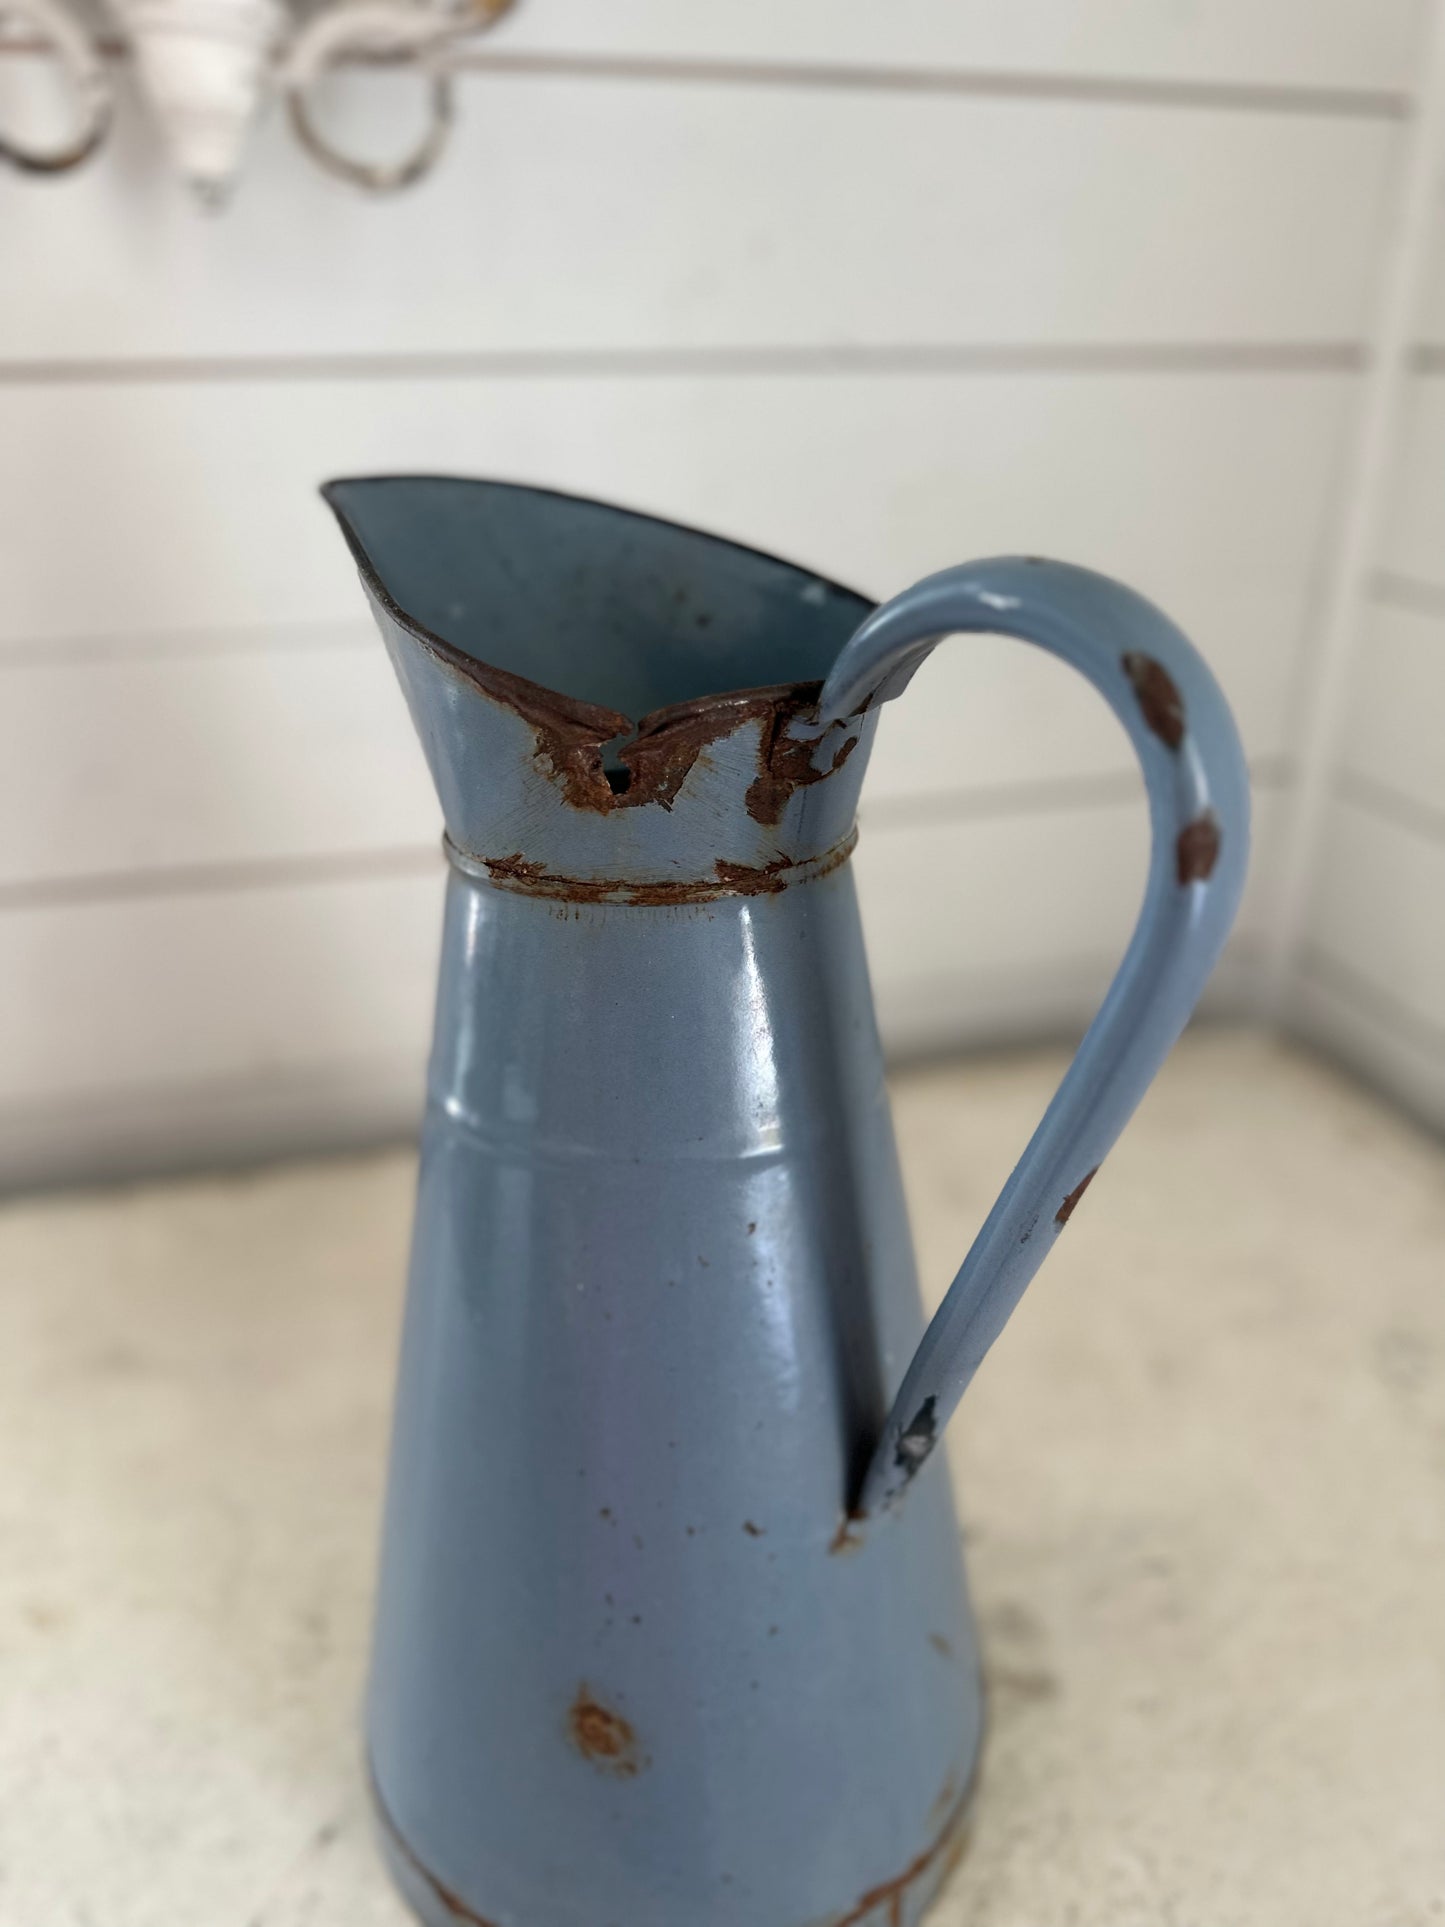 Large Blue French Enamel Pitcher - has wear as shown